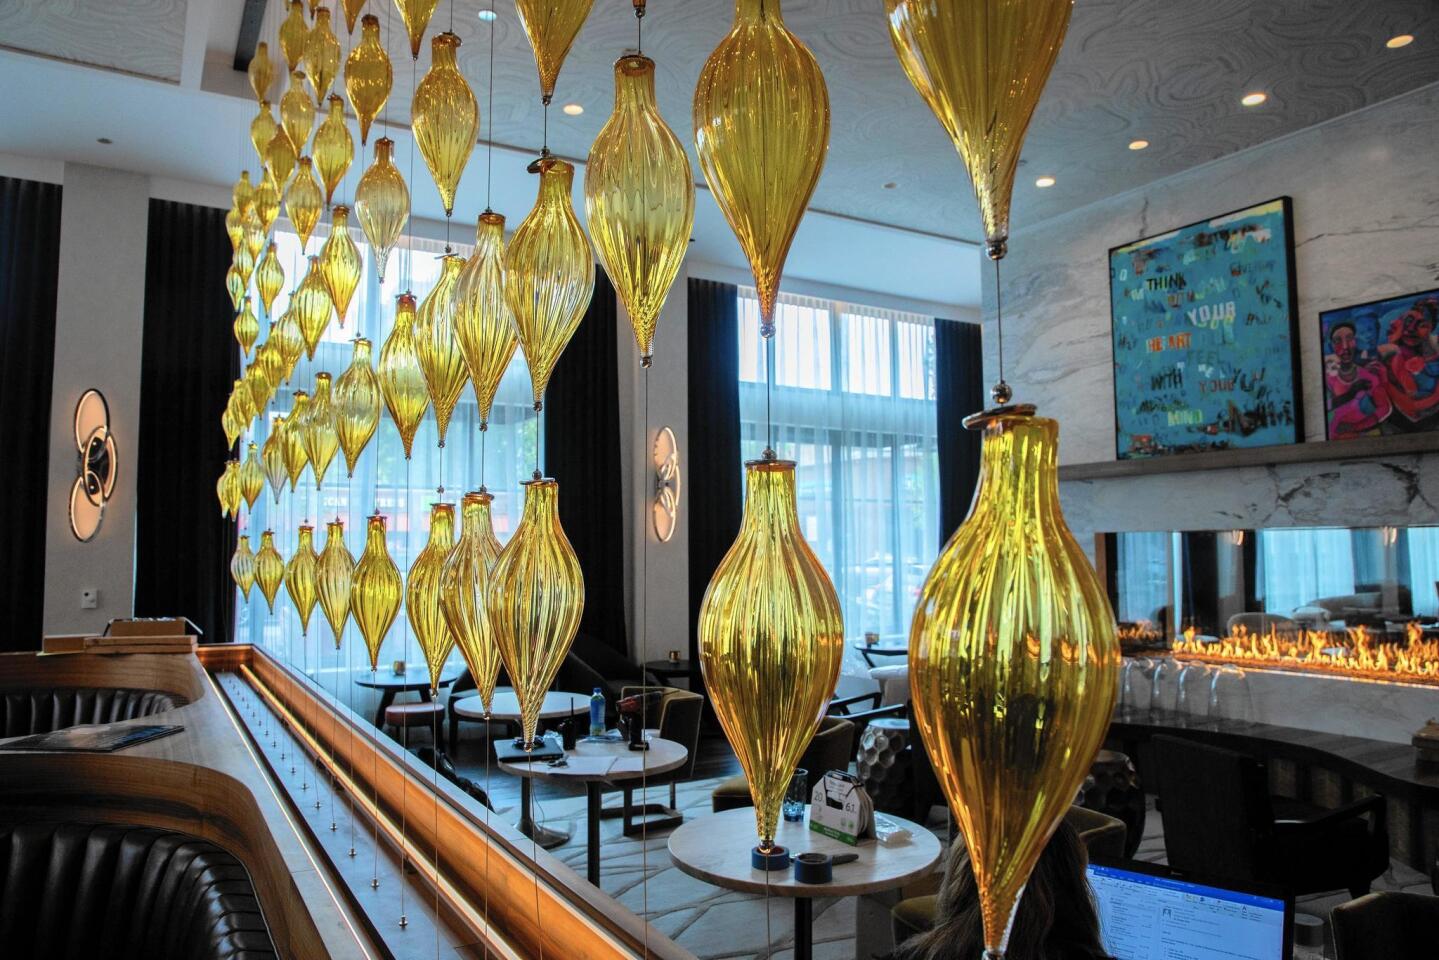 Amber-colored glass beads provide a translucent transition between the music-inspired lobby and the more scientific-minded bar.